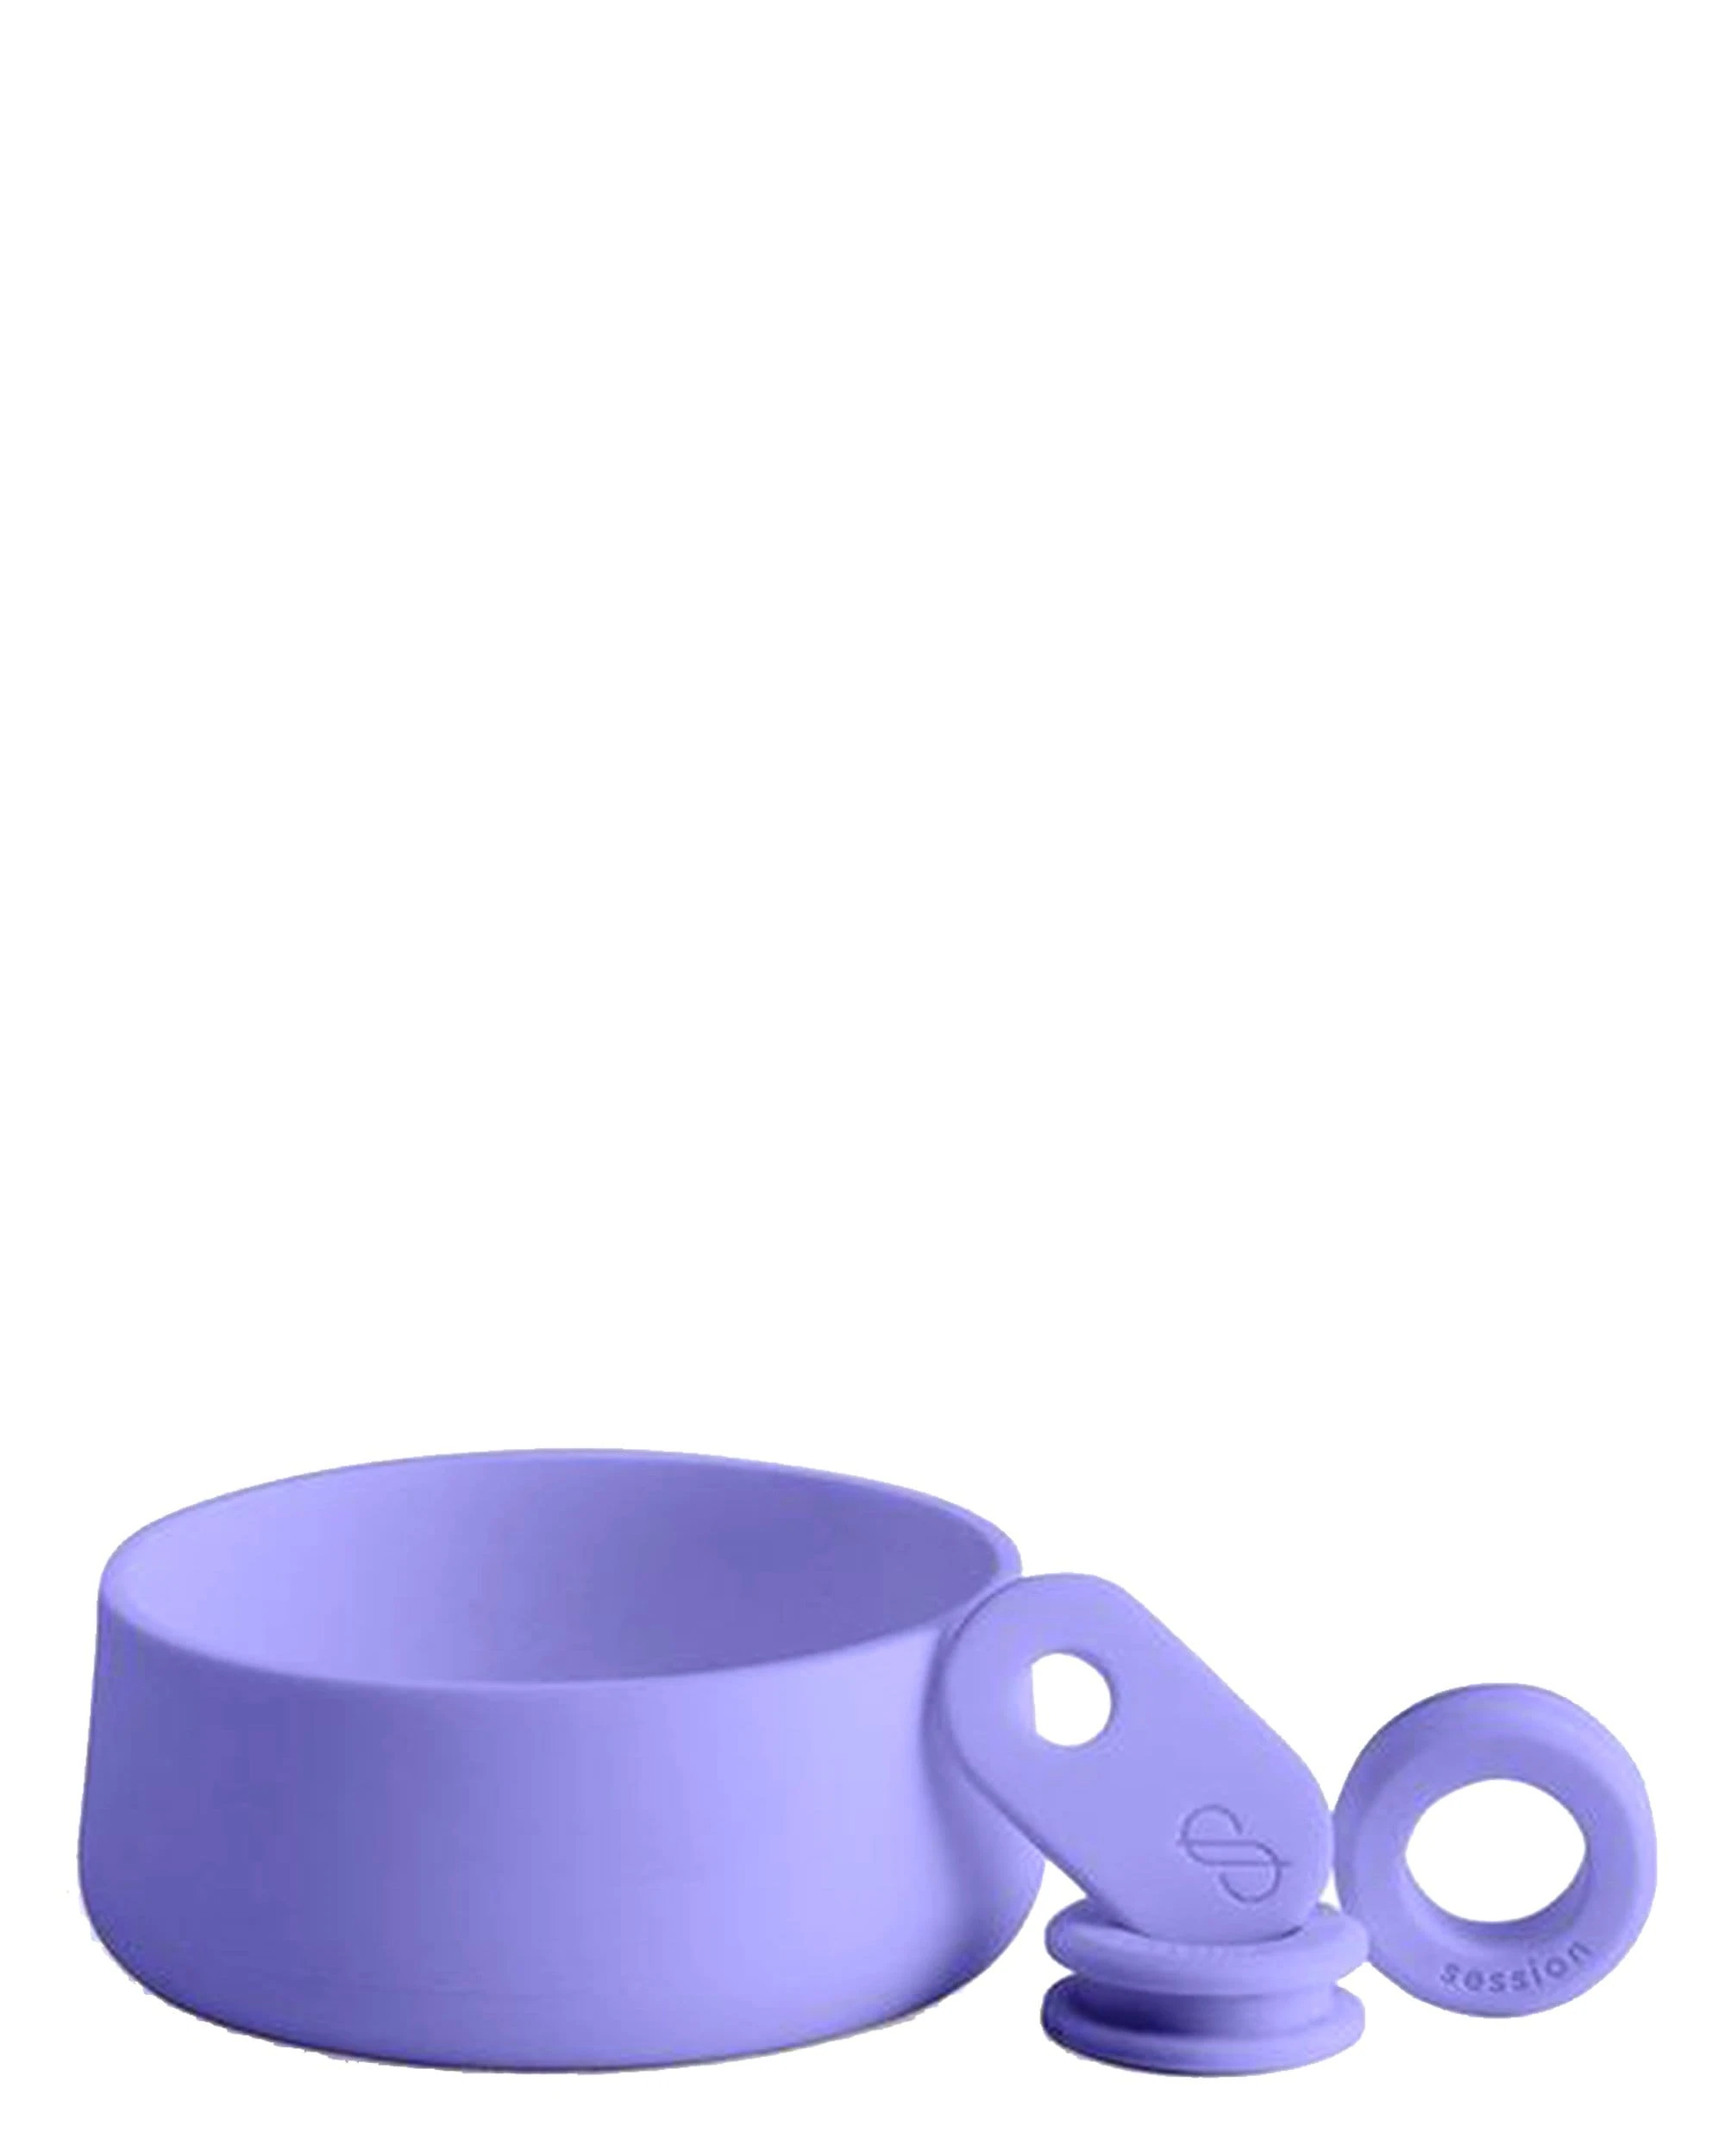 Session Goods Silicone Accessories